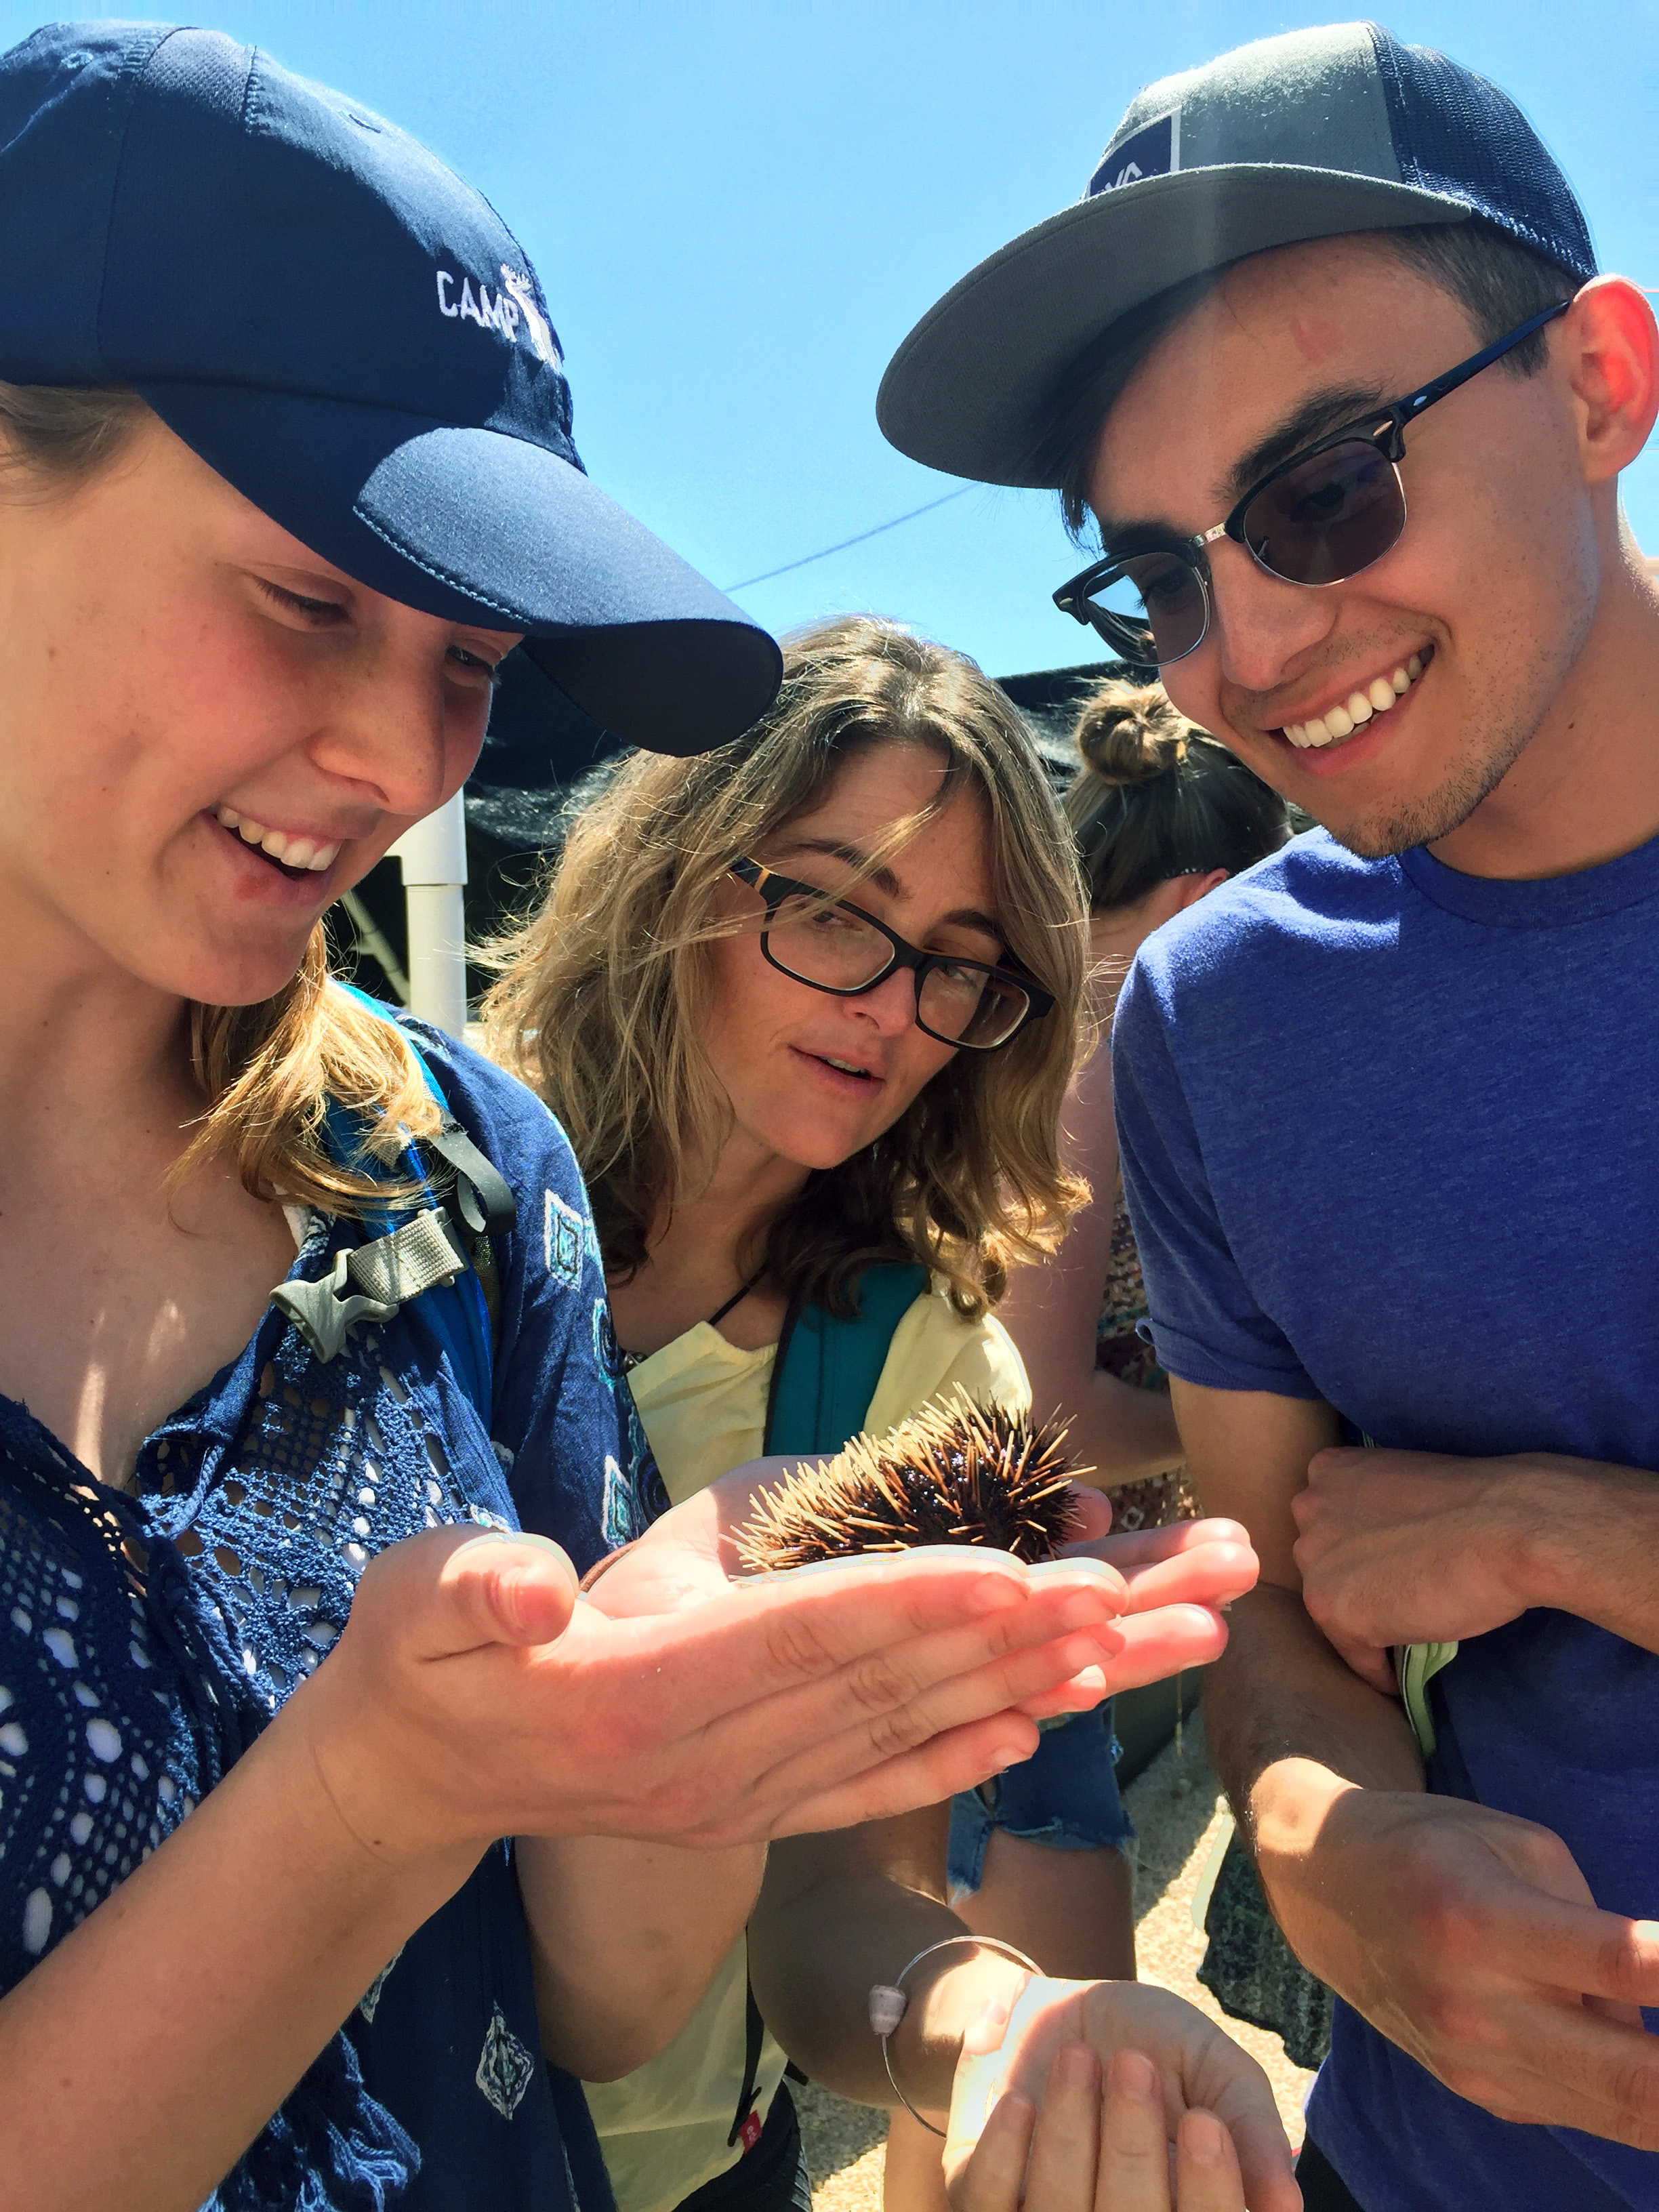 Students examining a sea urchin in a woman's hand